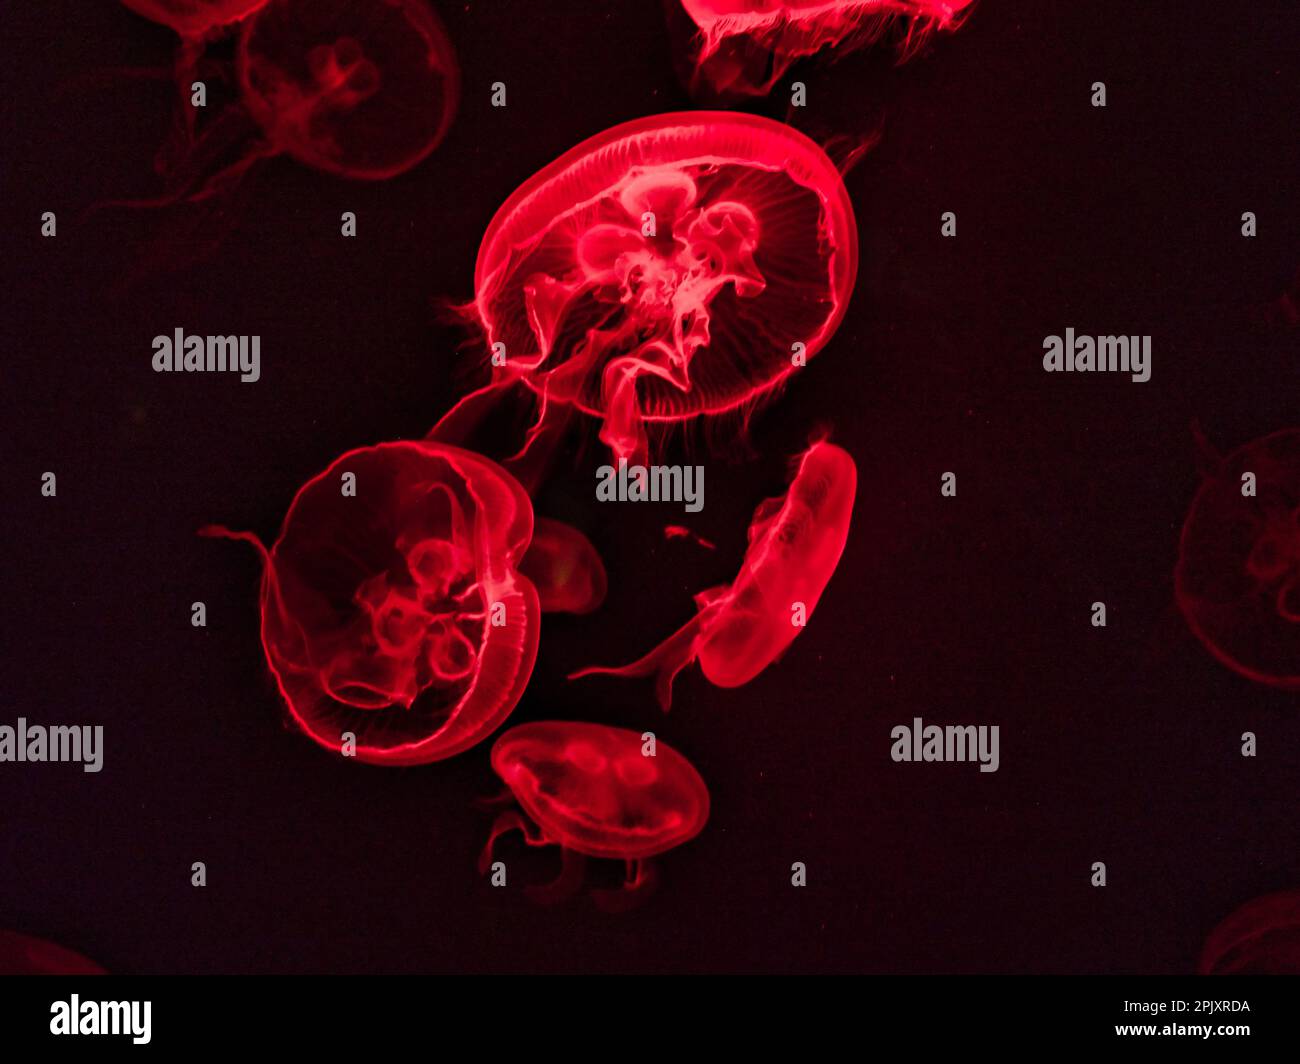 Red colored glowing translucent Moon Jellyfish swimming in dark tank Stock Photo